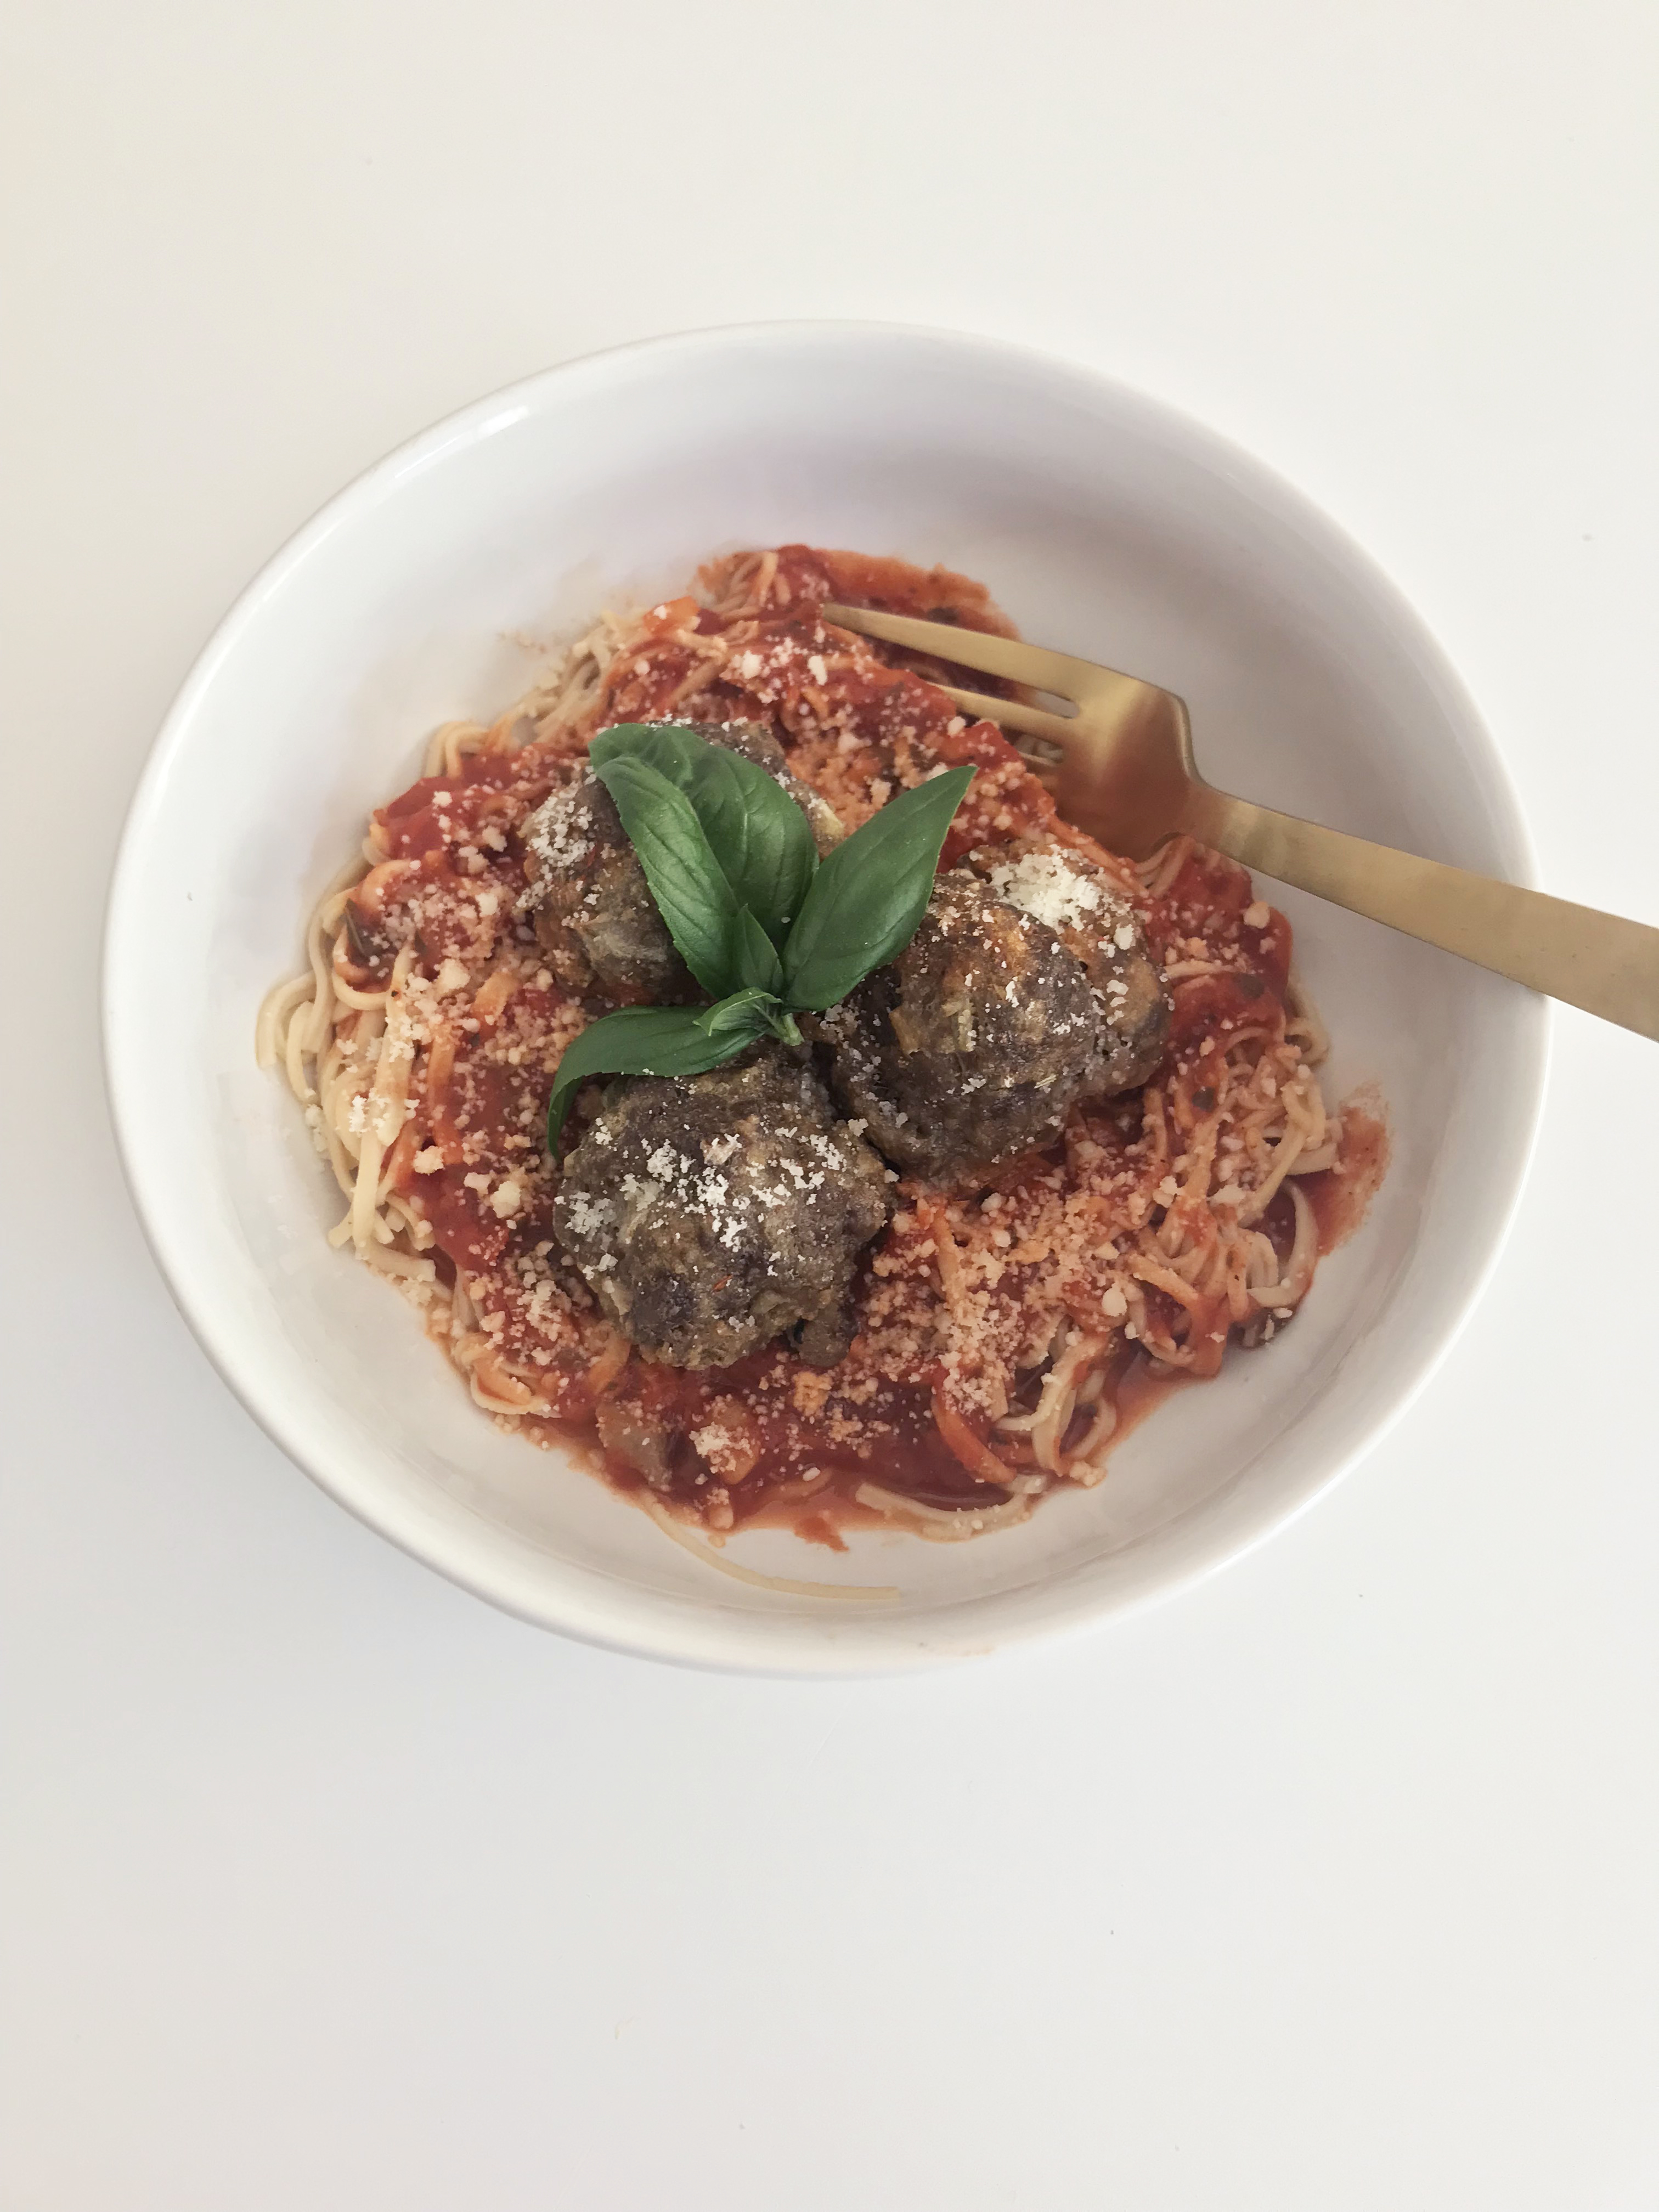 Thumbnail for Low Carb Spaghetti and Meatballs